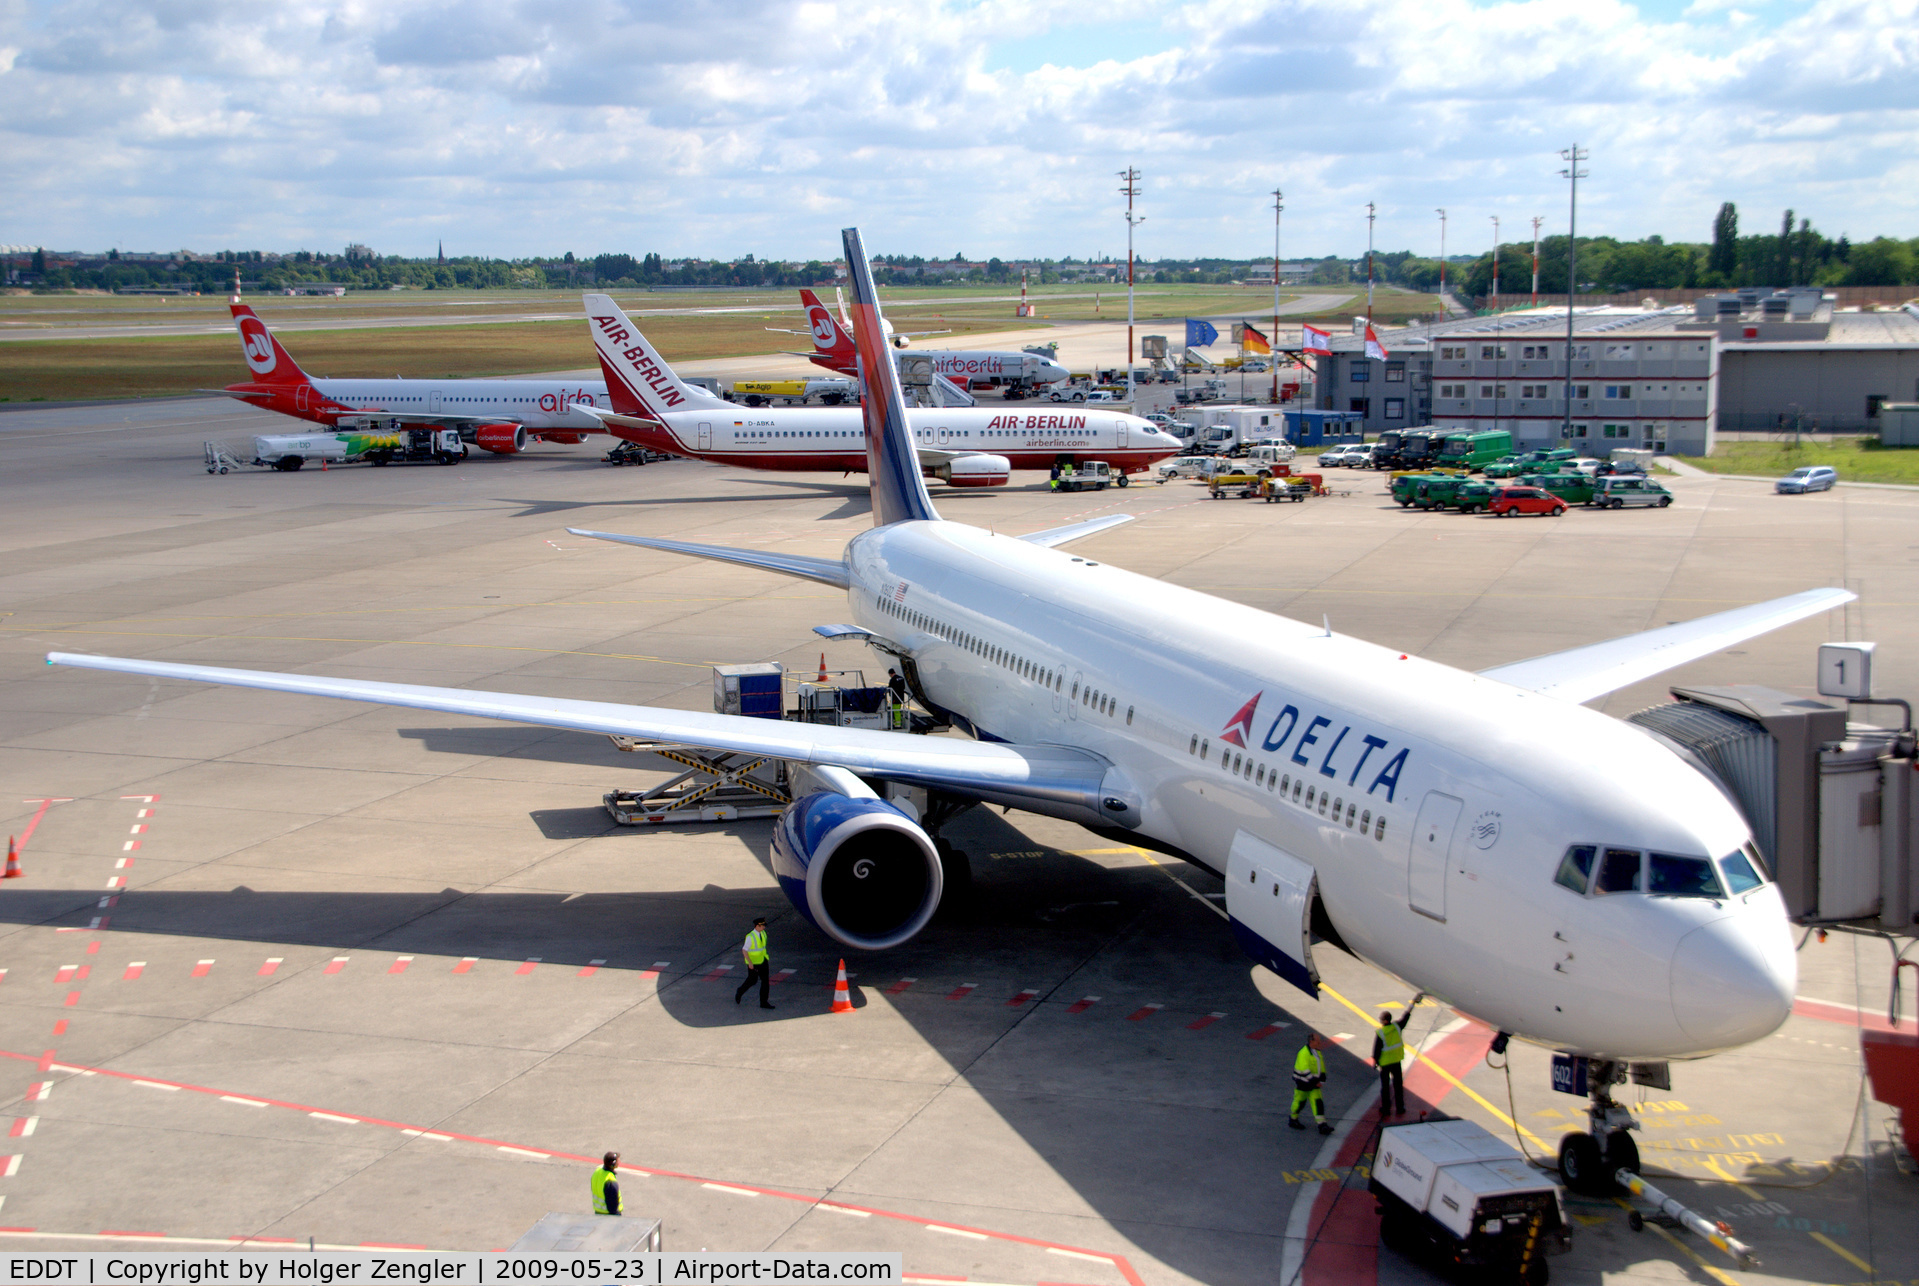 Tegel International Airport (closing in 2011), Berlin Germany (EDDT) - How colourful a saturday morning at TXL can be!